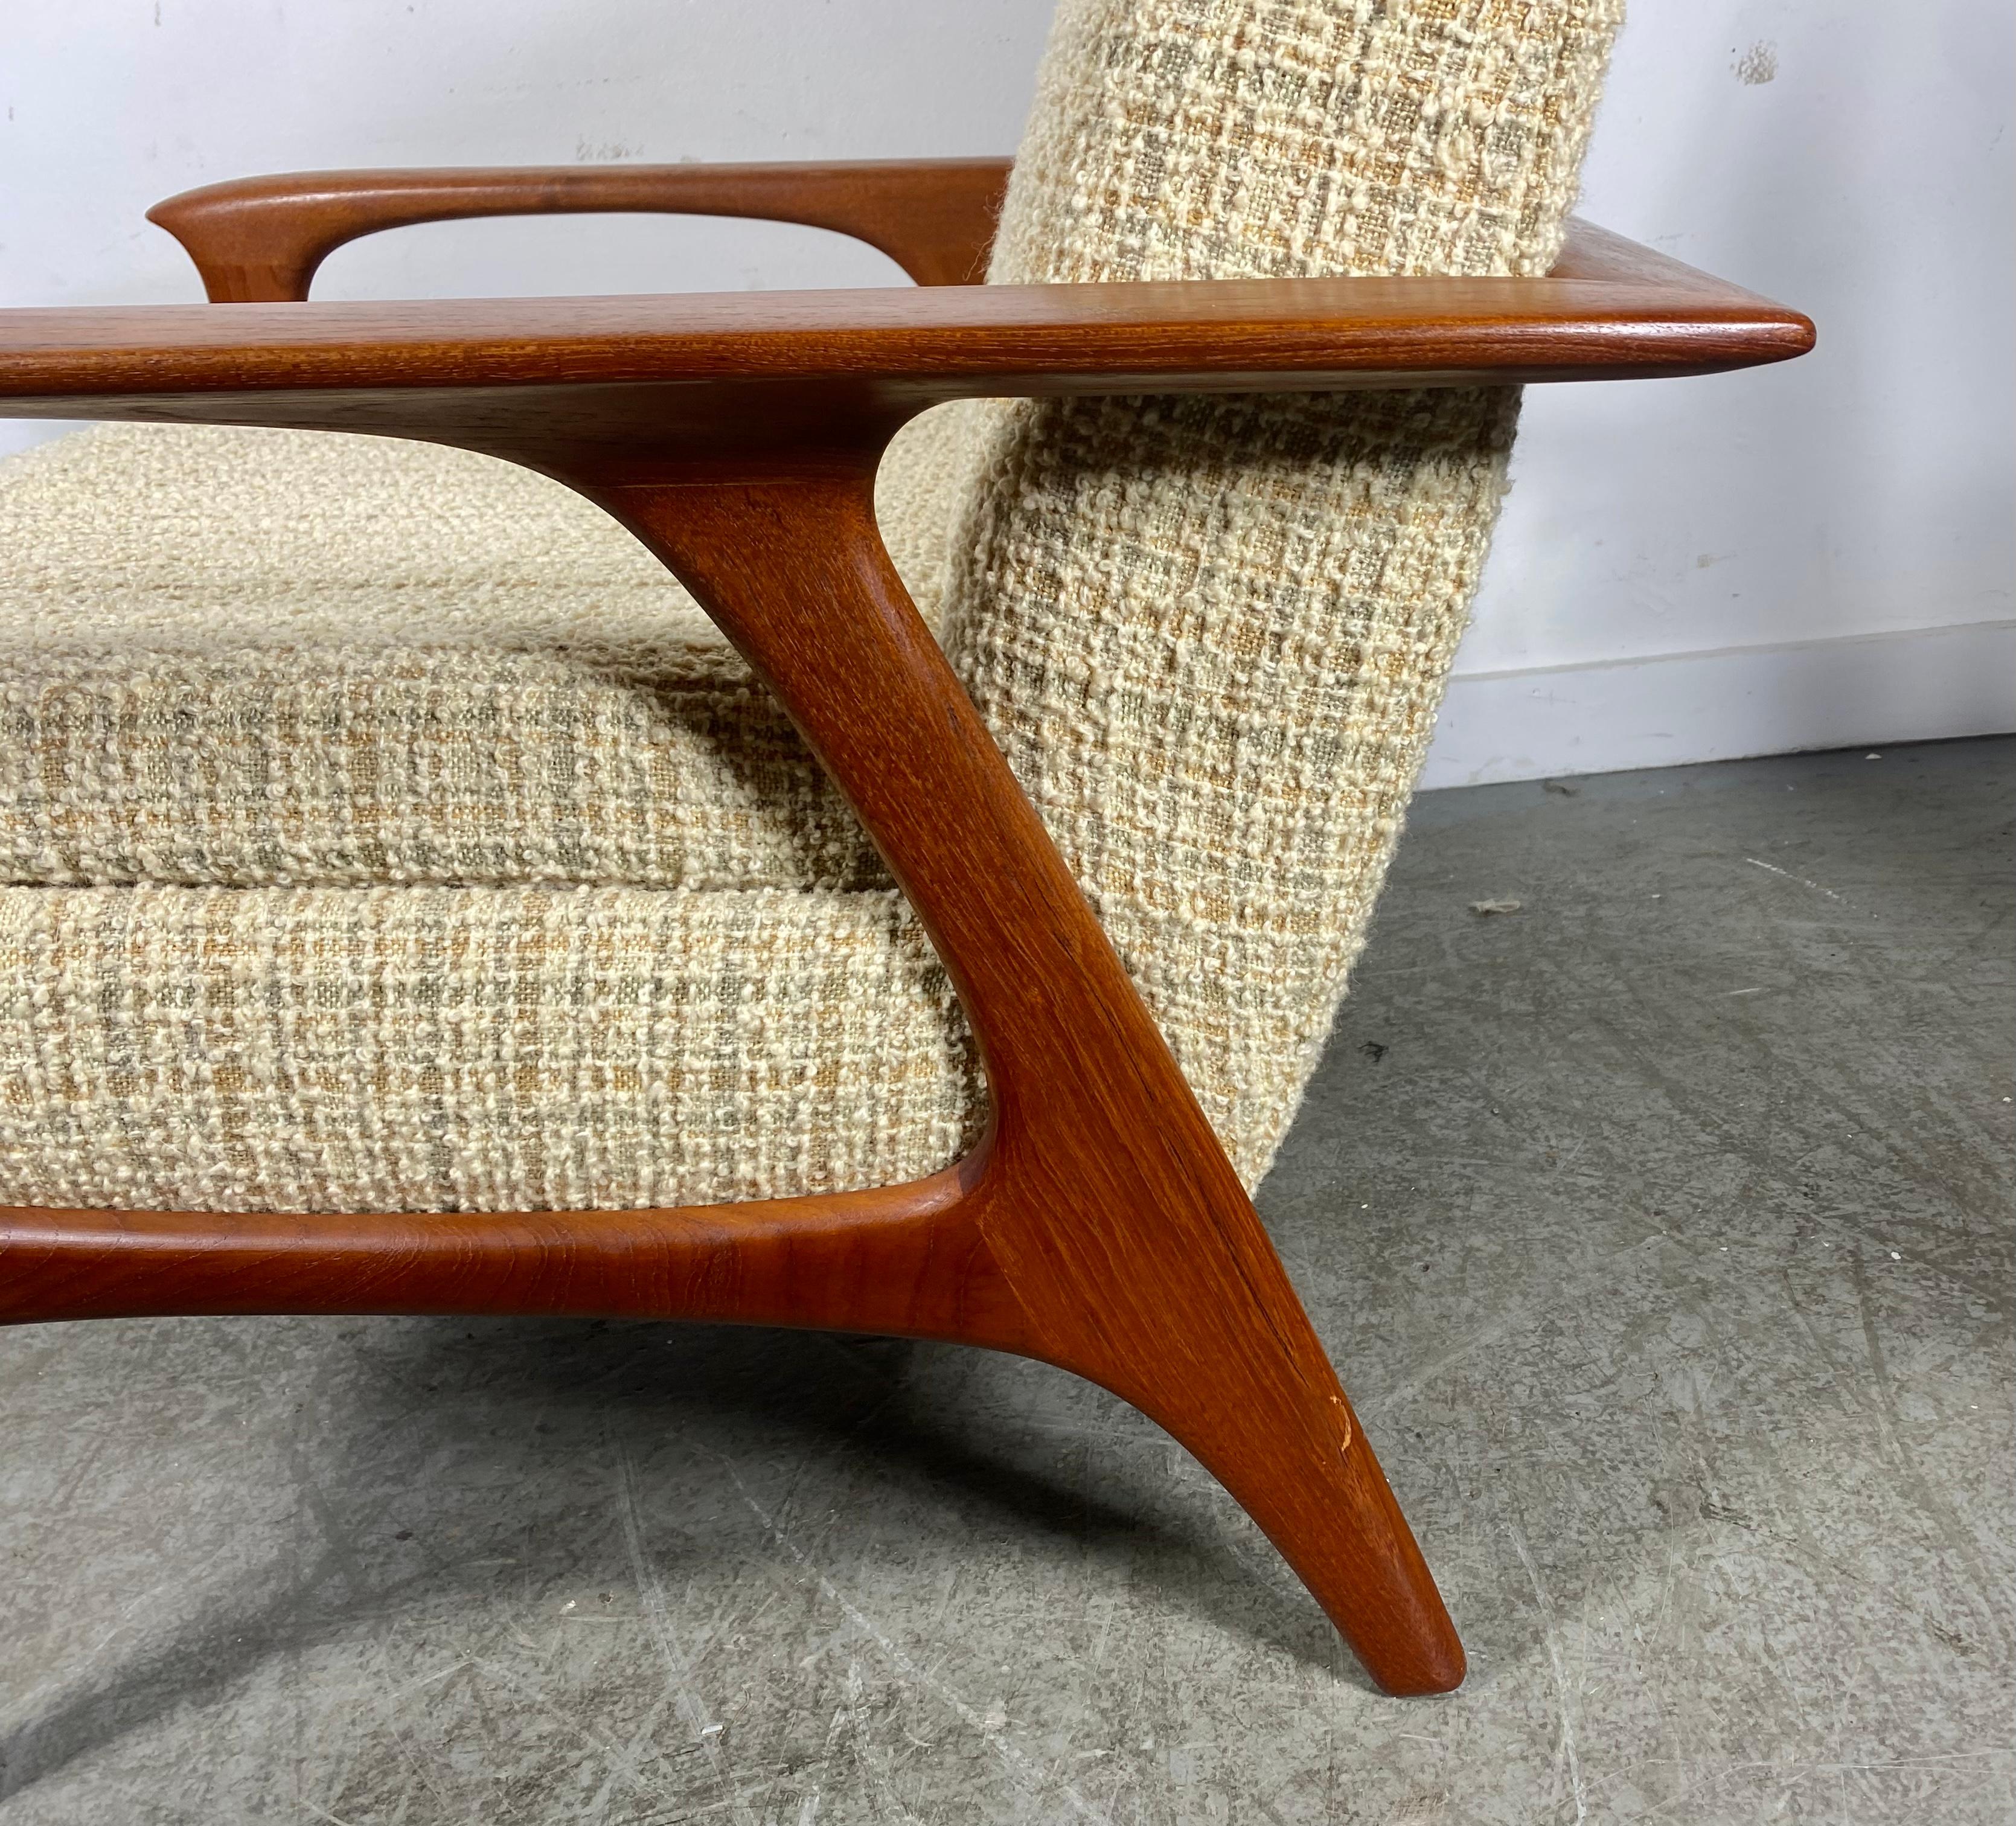 Classic Scandinavian Modern Teak Lounge Chair , manner Of Hans Wegner. Superior quality and construction.Classic ,sleek deign. Retains original cream color wool fabric upholstery in excellent original condition. interior seat cushion just starting